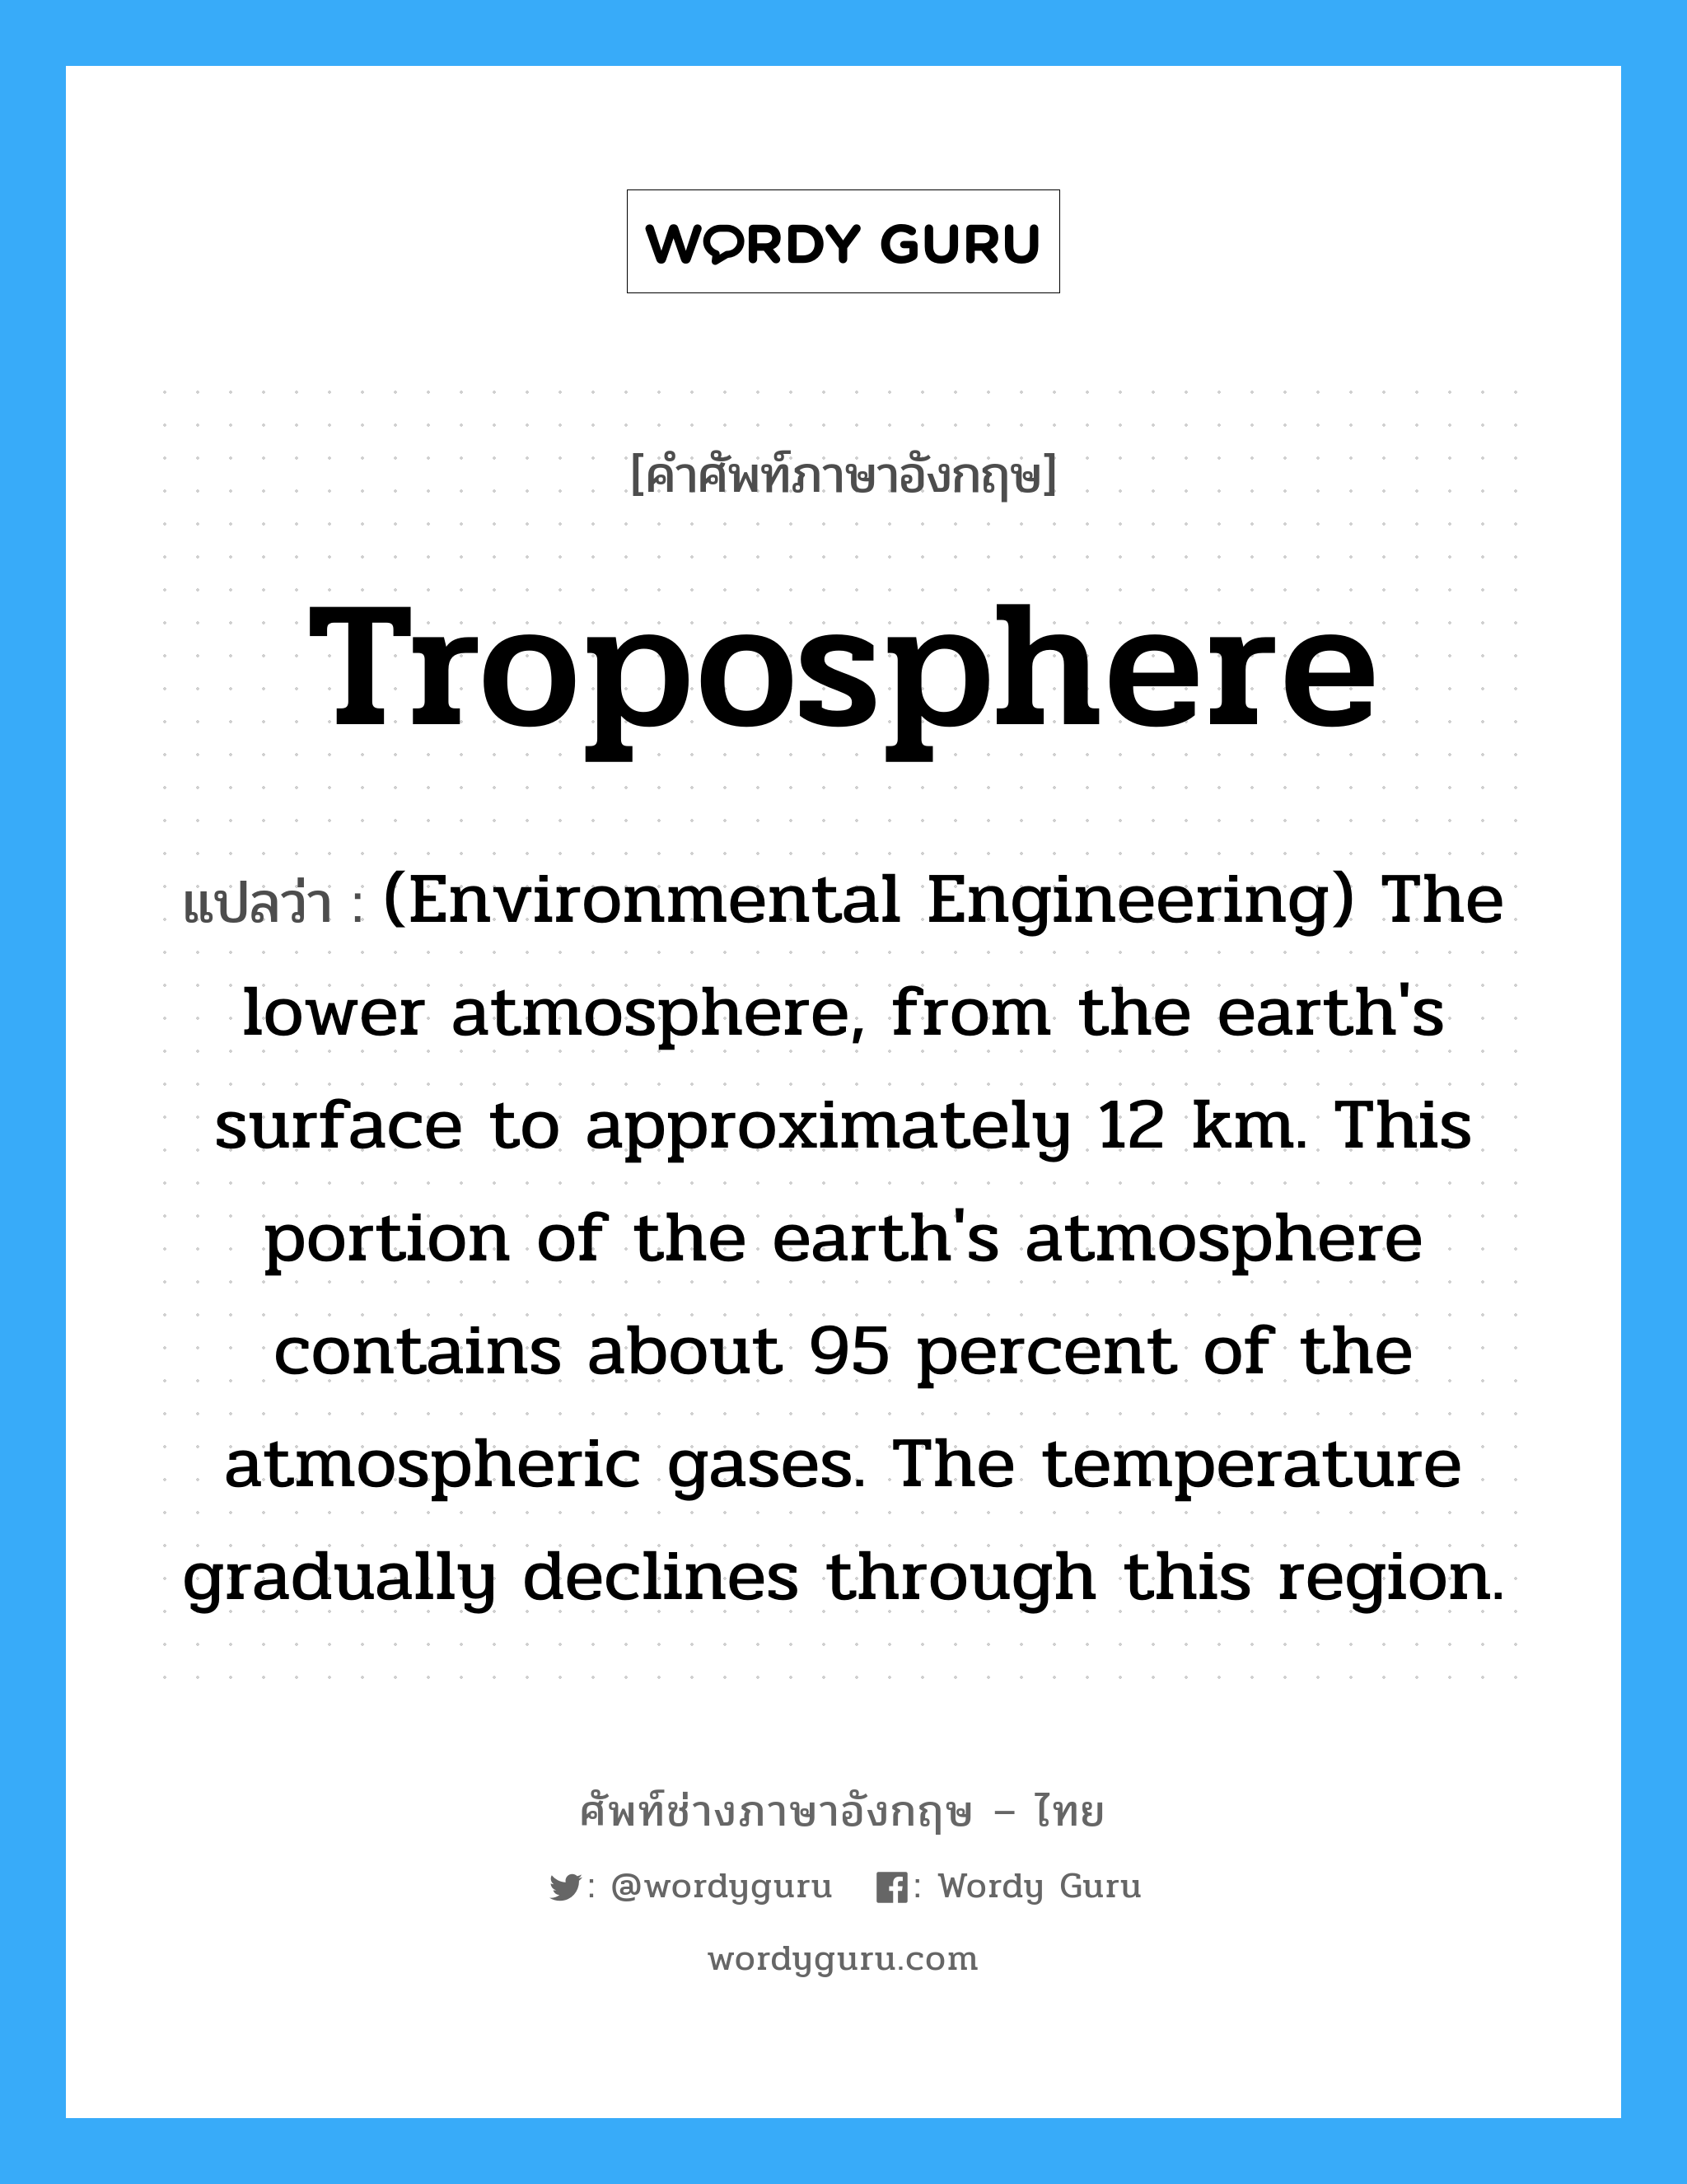 Troposphere แปลว่า?, คำศัพท์ช่างภาษาอังกฤษ - ไทย Troposphere คำศัพท์ภาษาอังกฤษ Troposphere แปลว่า (Environmental Engineering) The lower atmosphere, from the earth's surface to approximately 12 km. This portion of the earth's atmosphere contains about 95 percent of the atmospheric gases. The temperature gradually declines through this region.